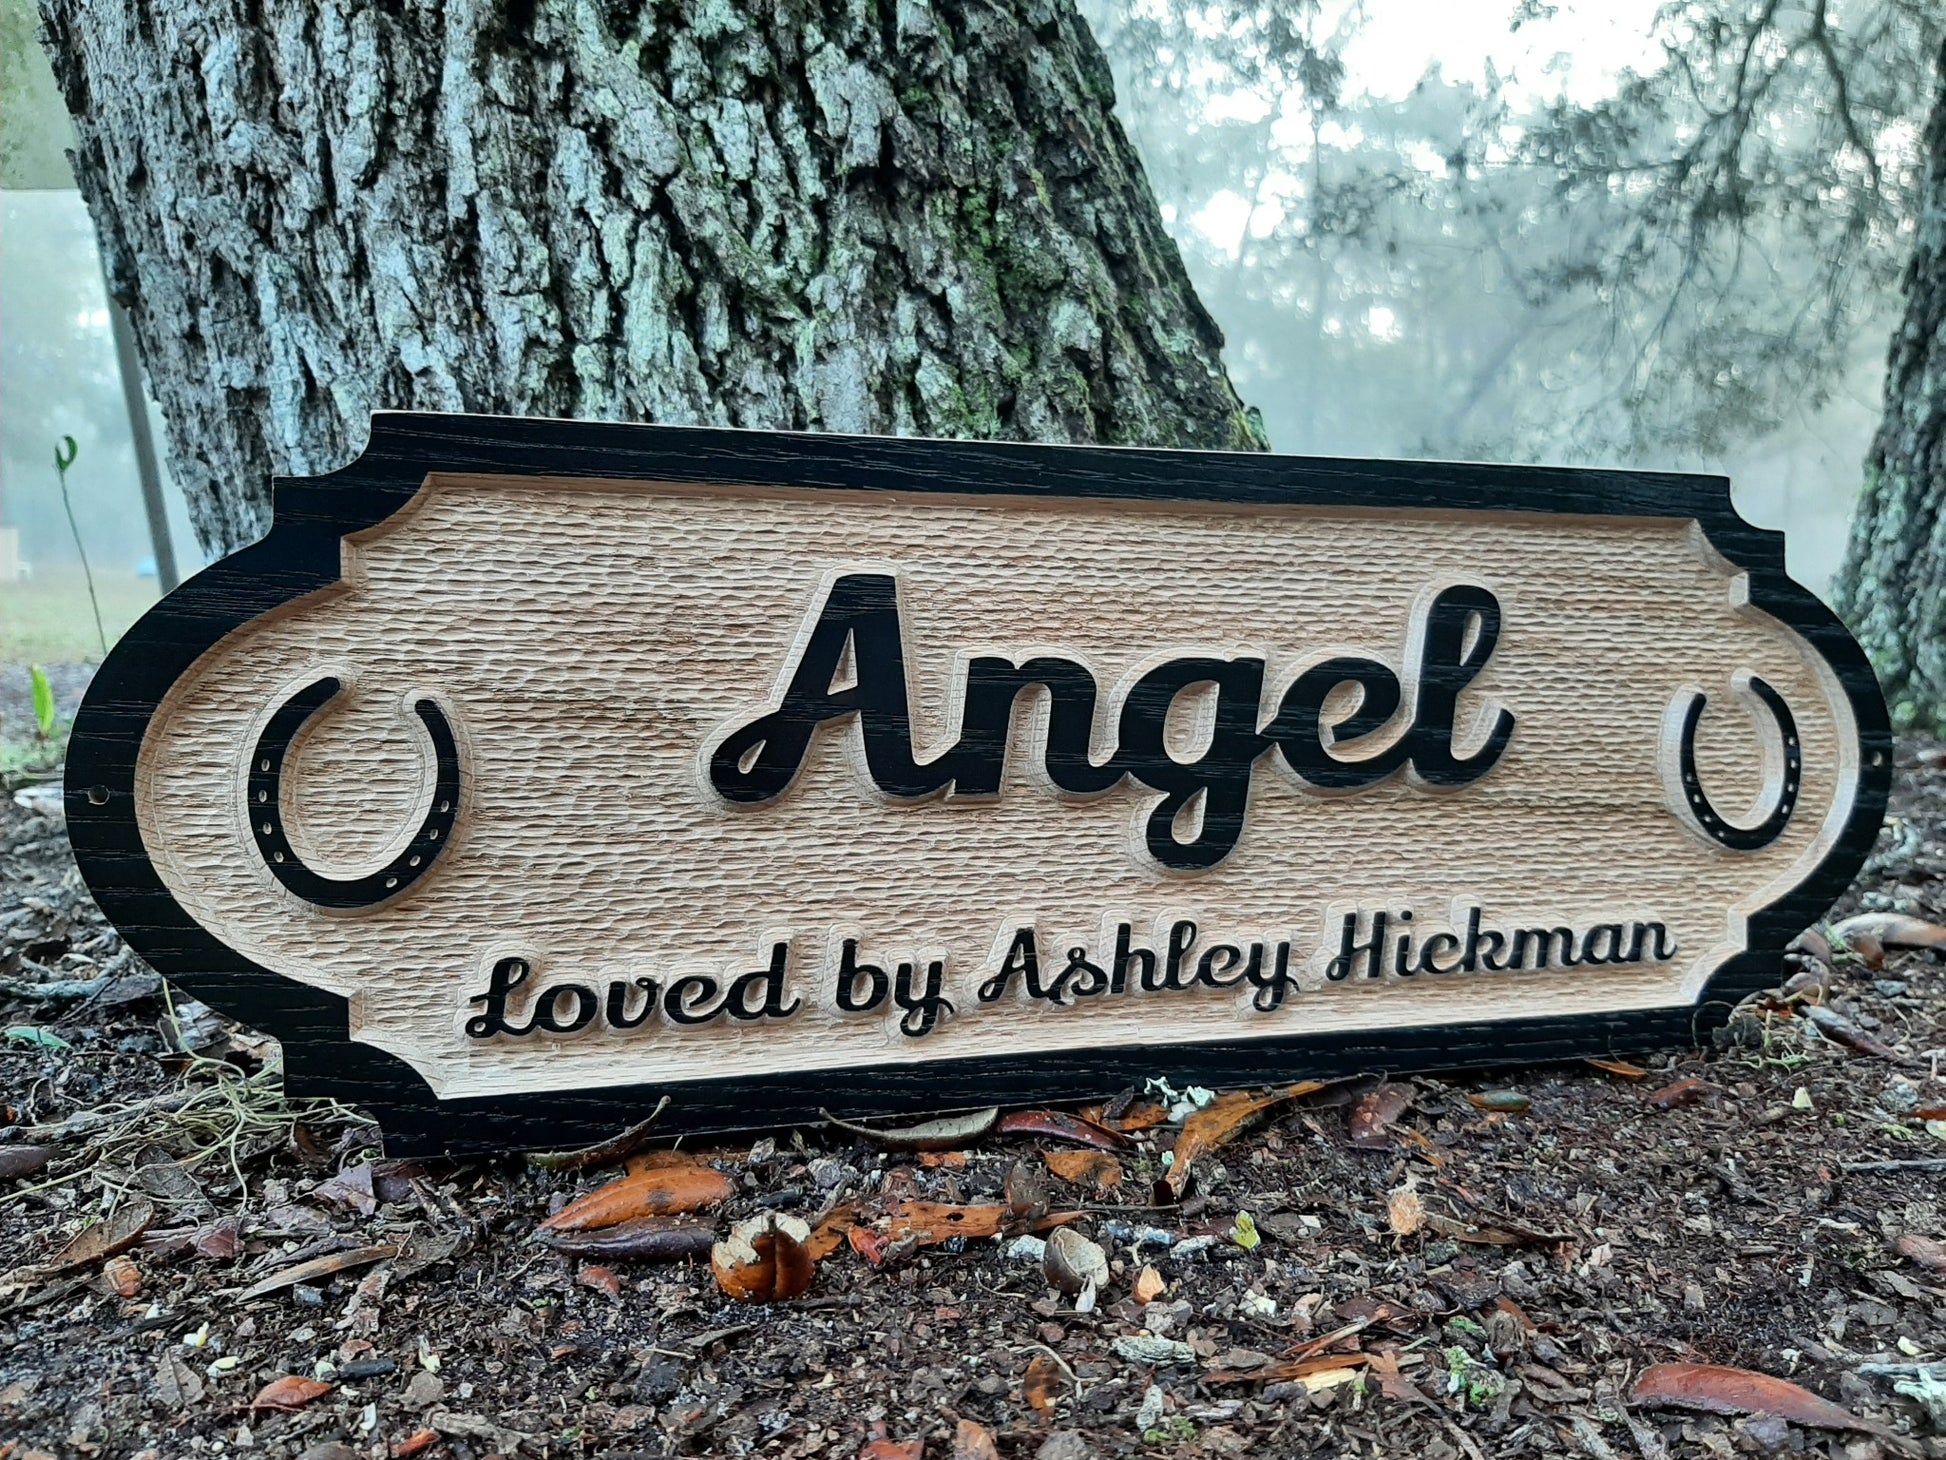 red oak 18 inch horse stall name signs made in the USA.